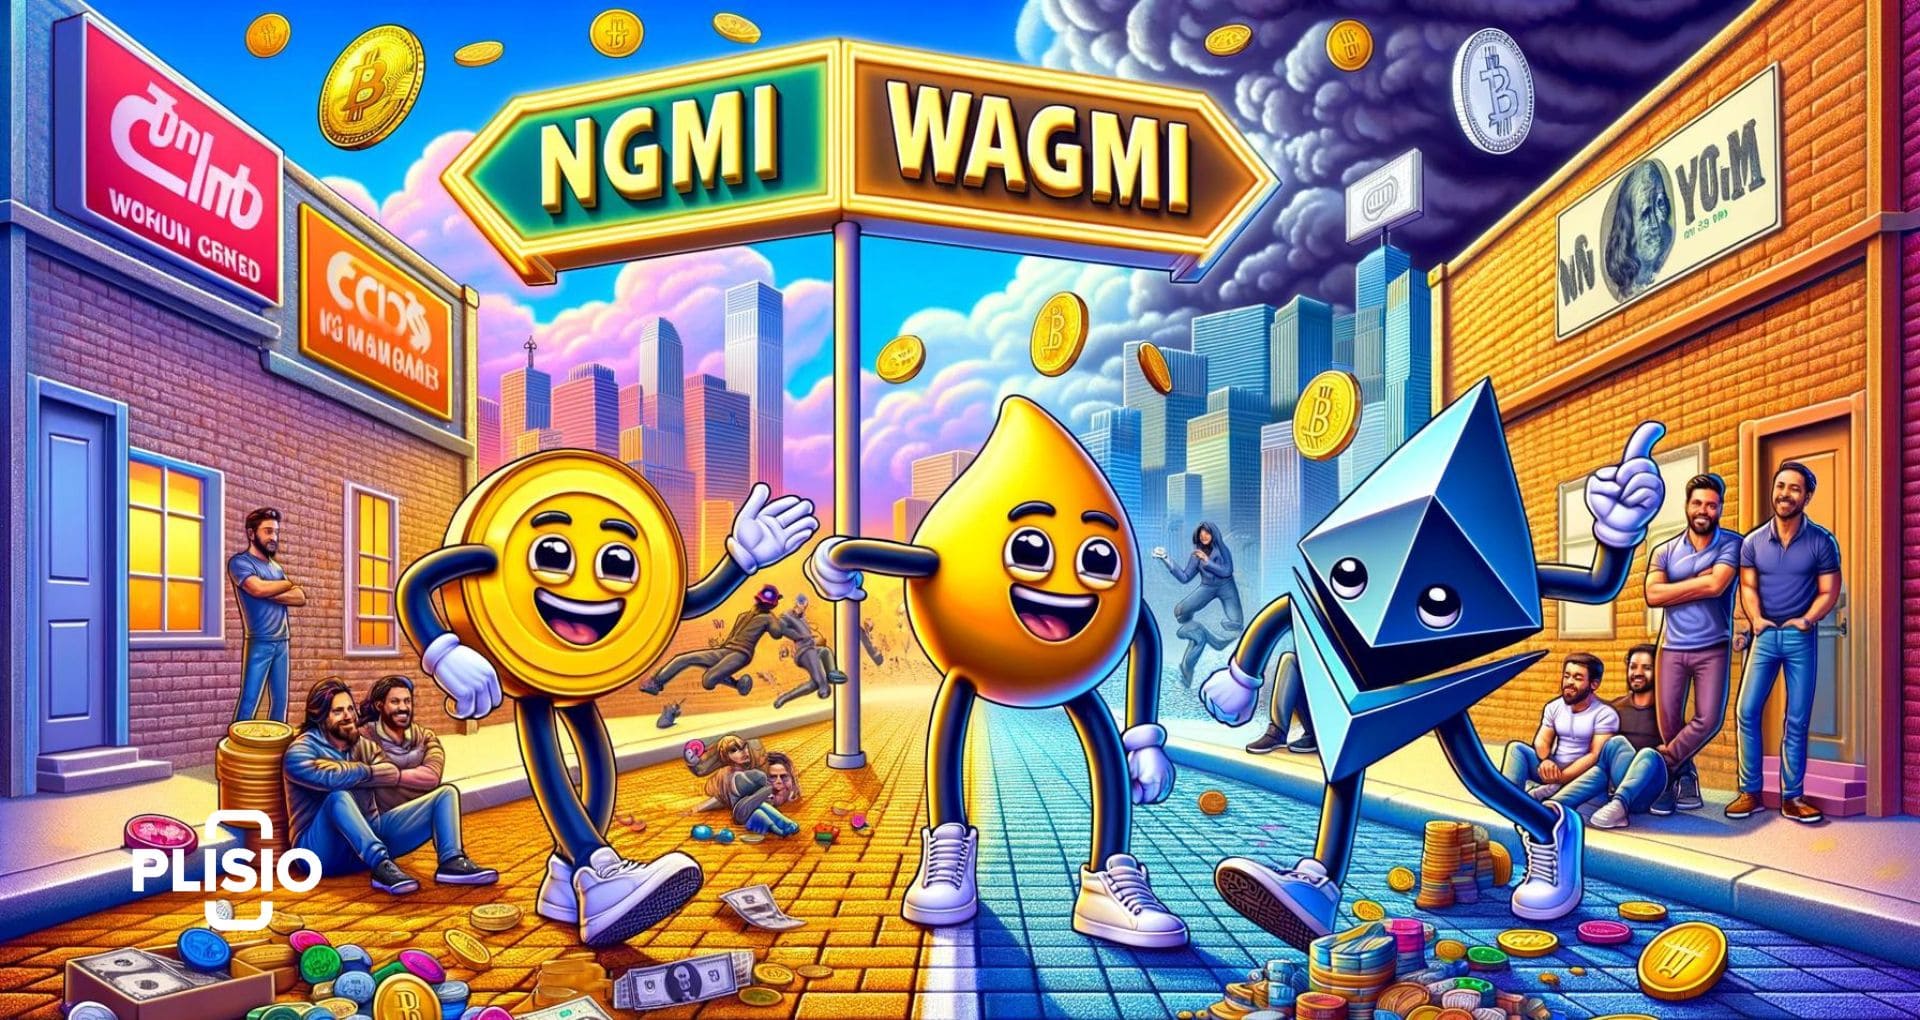 NGMI vs WAGMI Meaning in Crypto and How to Use It